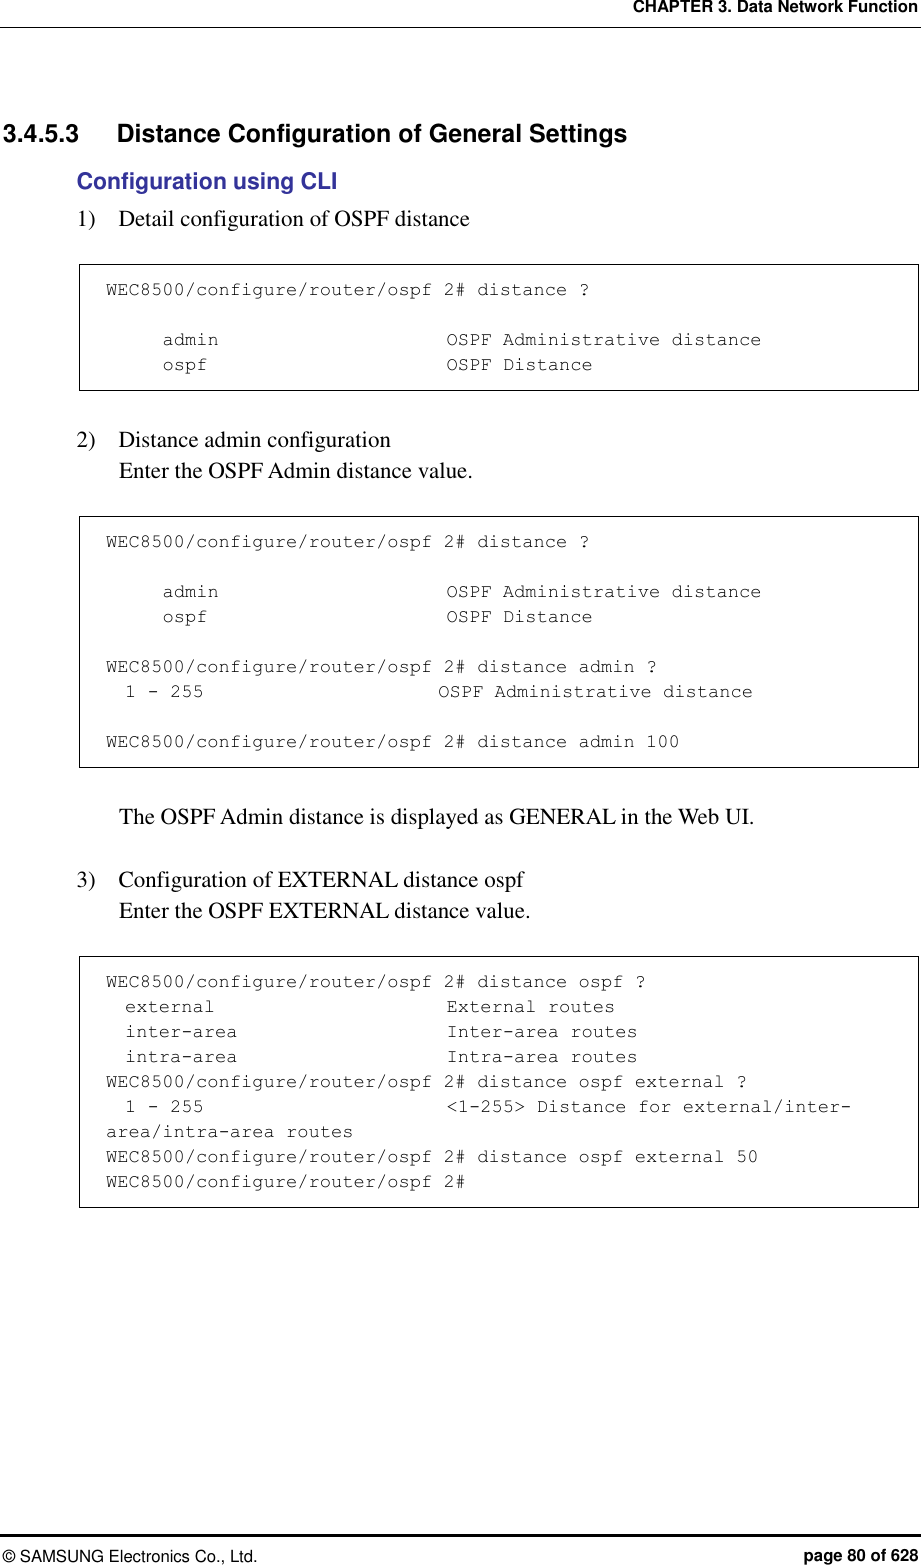 CHAPTER 3. Data Network Function ©  SAMSUNG Electronics Co., Ltd.  page 80 of 628 3.4.5.3  Distance Configuration of General Settings   Configuration using CLI 1)    Detail configuration of OSPF distance    WEC8500/configure/router/ospf 2# distance ?                     admin                        OSPF Administrative distance       ospf                          OSPF Distance  2)    Distance admin configuration   Enter the OSPF Admin distance value.      WEC8500/configure/router/ospf 2# distance ?                     admin                        OSPF Administrative distance       ospf                          OSPF Distance  WEC8500/configure/router/ospf 2# distance admin ?   1 - 255                         OSPF Administrative distance  WEC8500/configure/router/ospf 2# distance admin 100  The OSPF Admin distance is displayed as GENERAL in the Web UI.    3)    Configuration of EXTERNAL distance ospf   Enter the OSPF EXTERNAL distance value.      WEC8500/configure/router/ospf 2# distance ospf ?   external                         External routes   inter-area                       Inter-area routes   intra-area                       Intra-area routes WEC8500/configure/router/ospf 2# distance ospf external ?   1 - 255                          &lt;1-255&gt; Distance for external/inter-area/intra-area routes WEC8500/configure/router/ospf 2# distance ospf external 50 WEC8500/configure/router/ospf 2#  